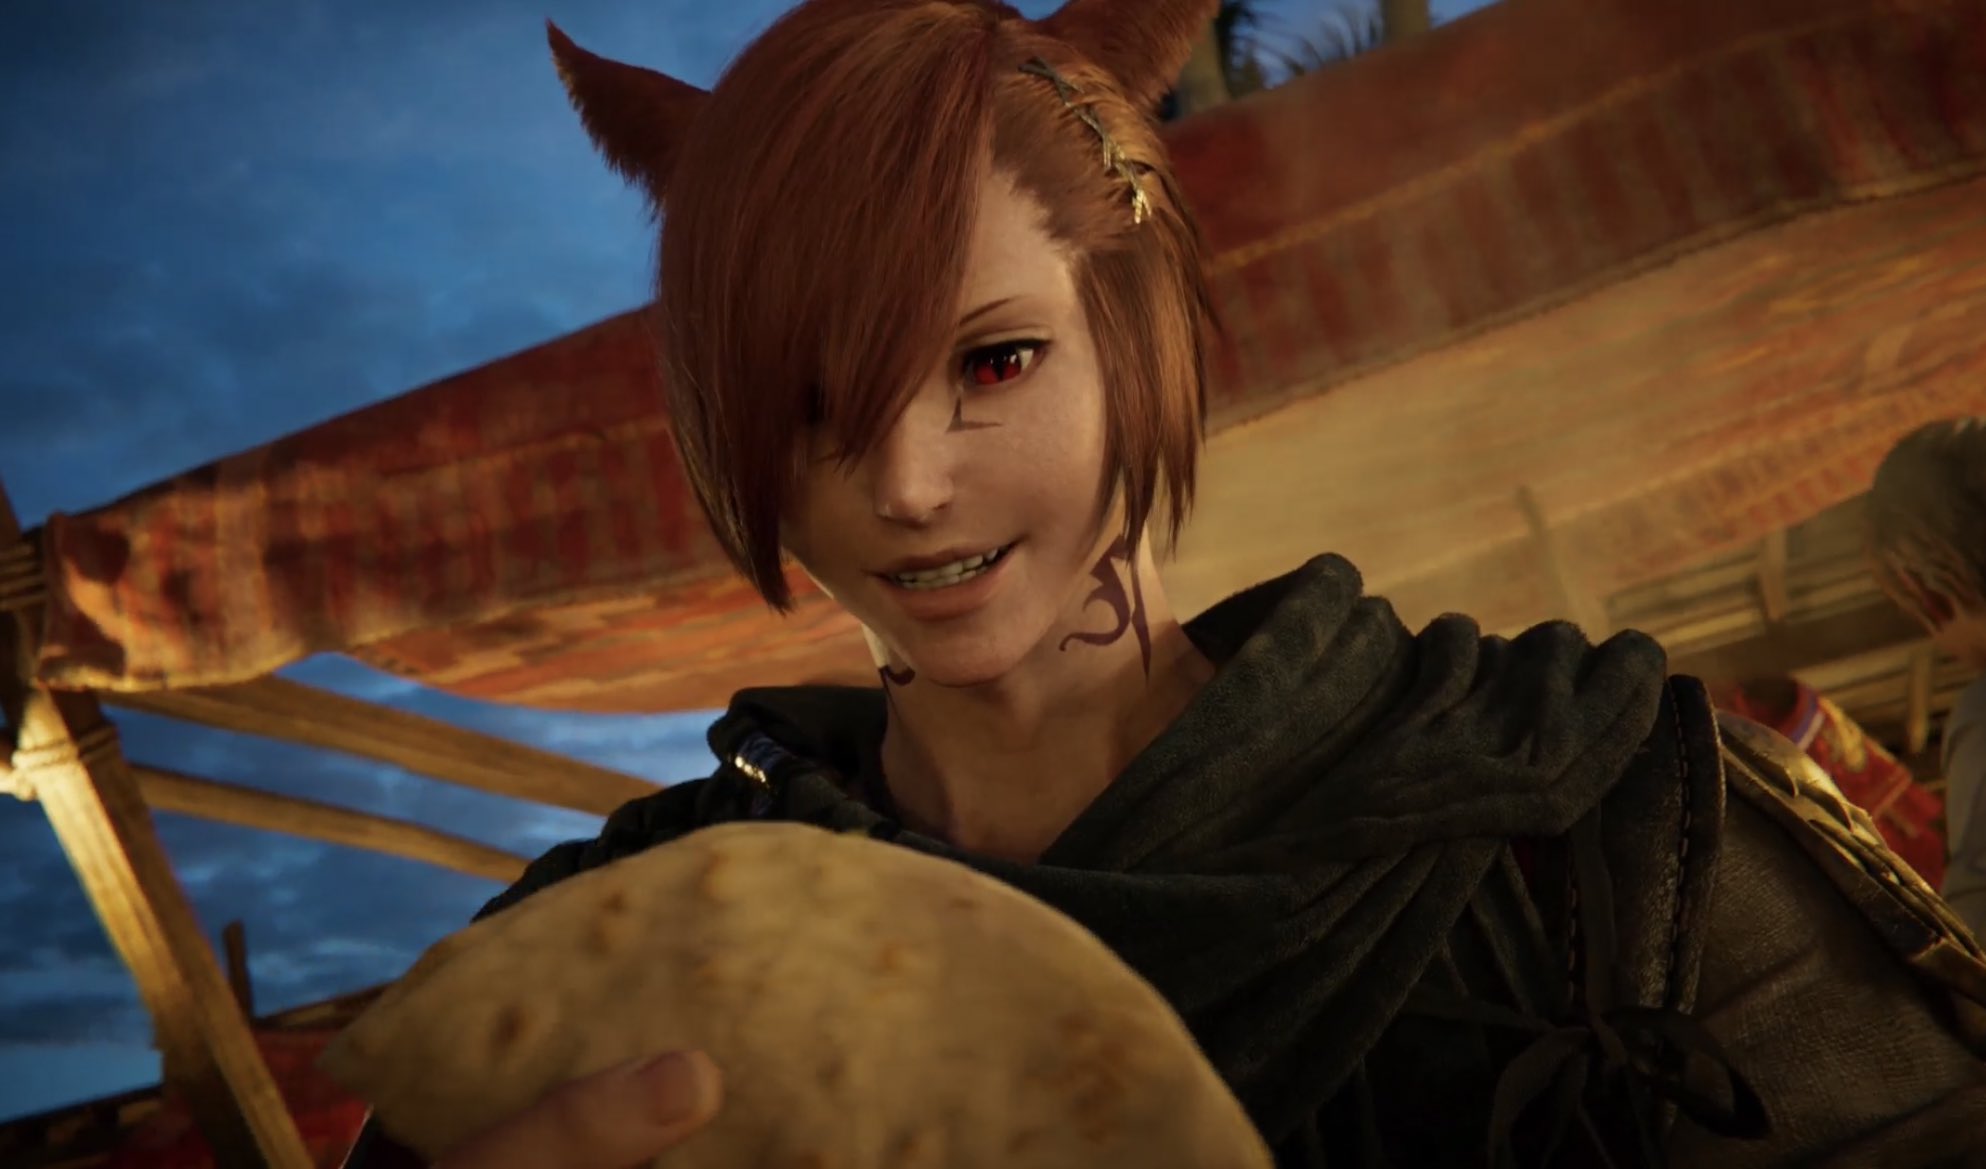 Final Fantasy 14 Dawntrail Adds Two New Dps Jobs And Yoshi P Might Be Baiting Us Over What They